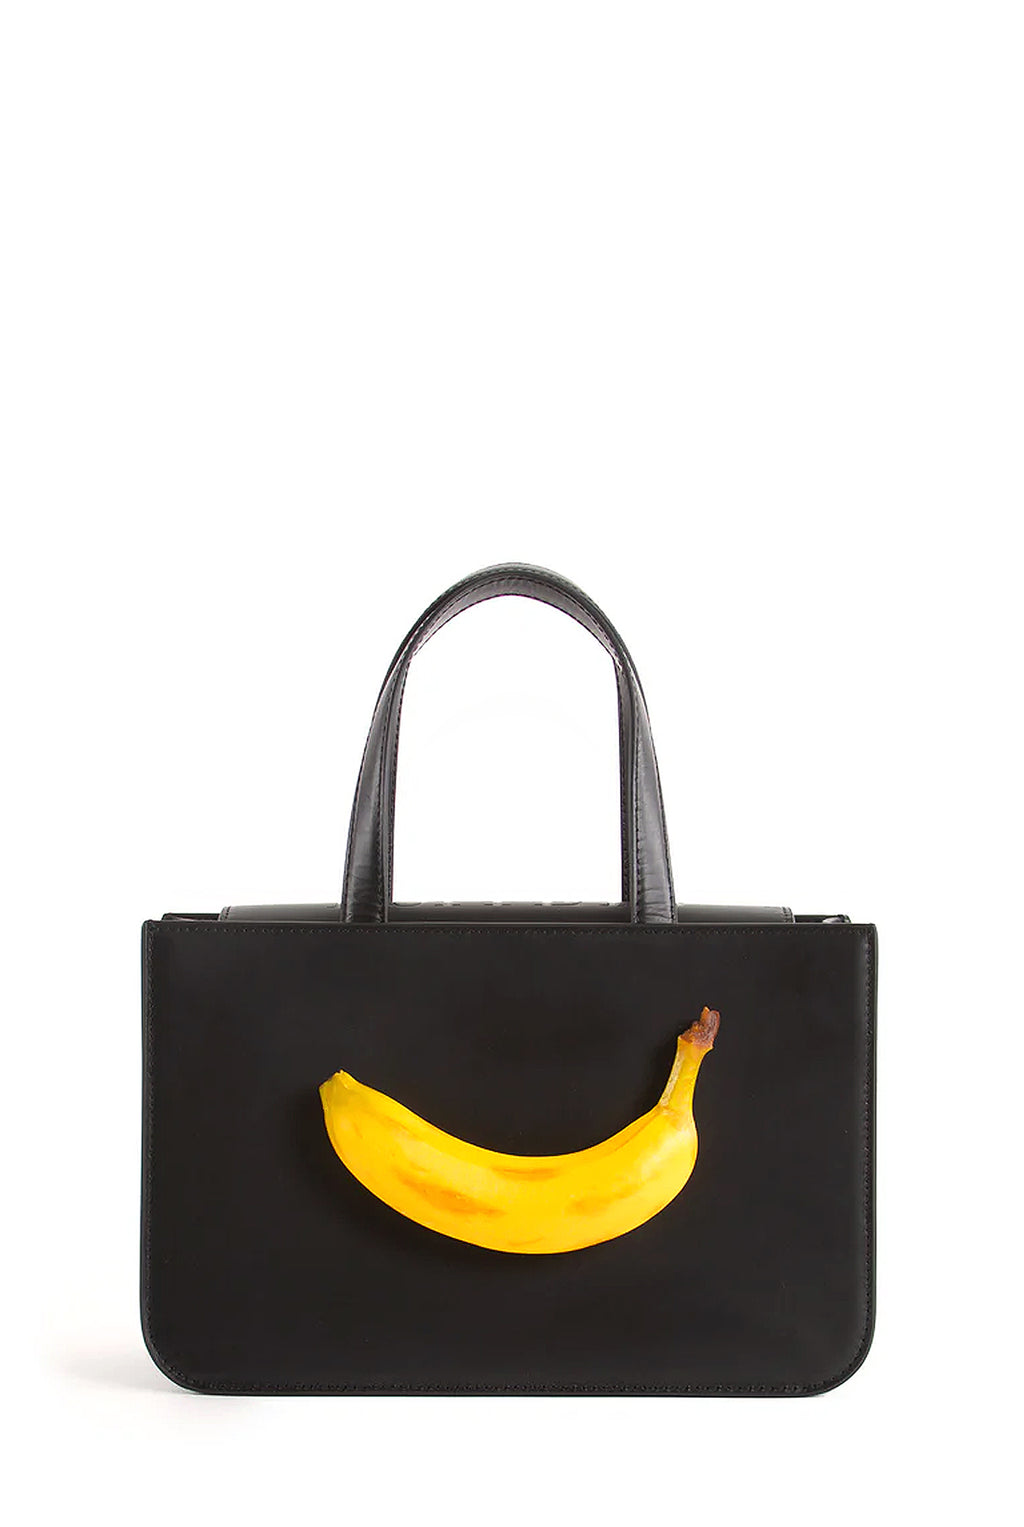 Puppets and Puppets Banana Bag, Black Leather - ONE LEFT!